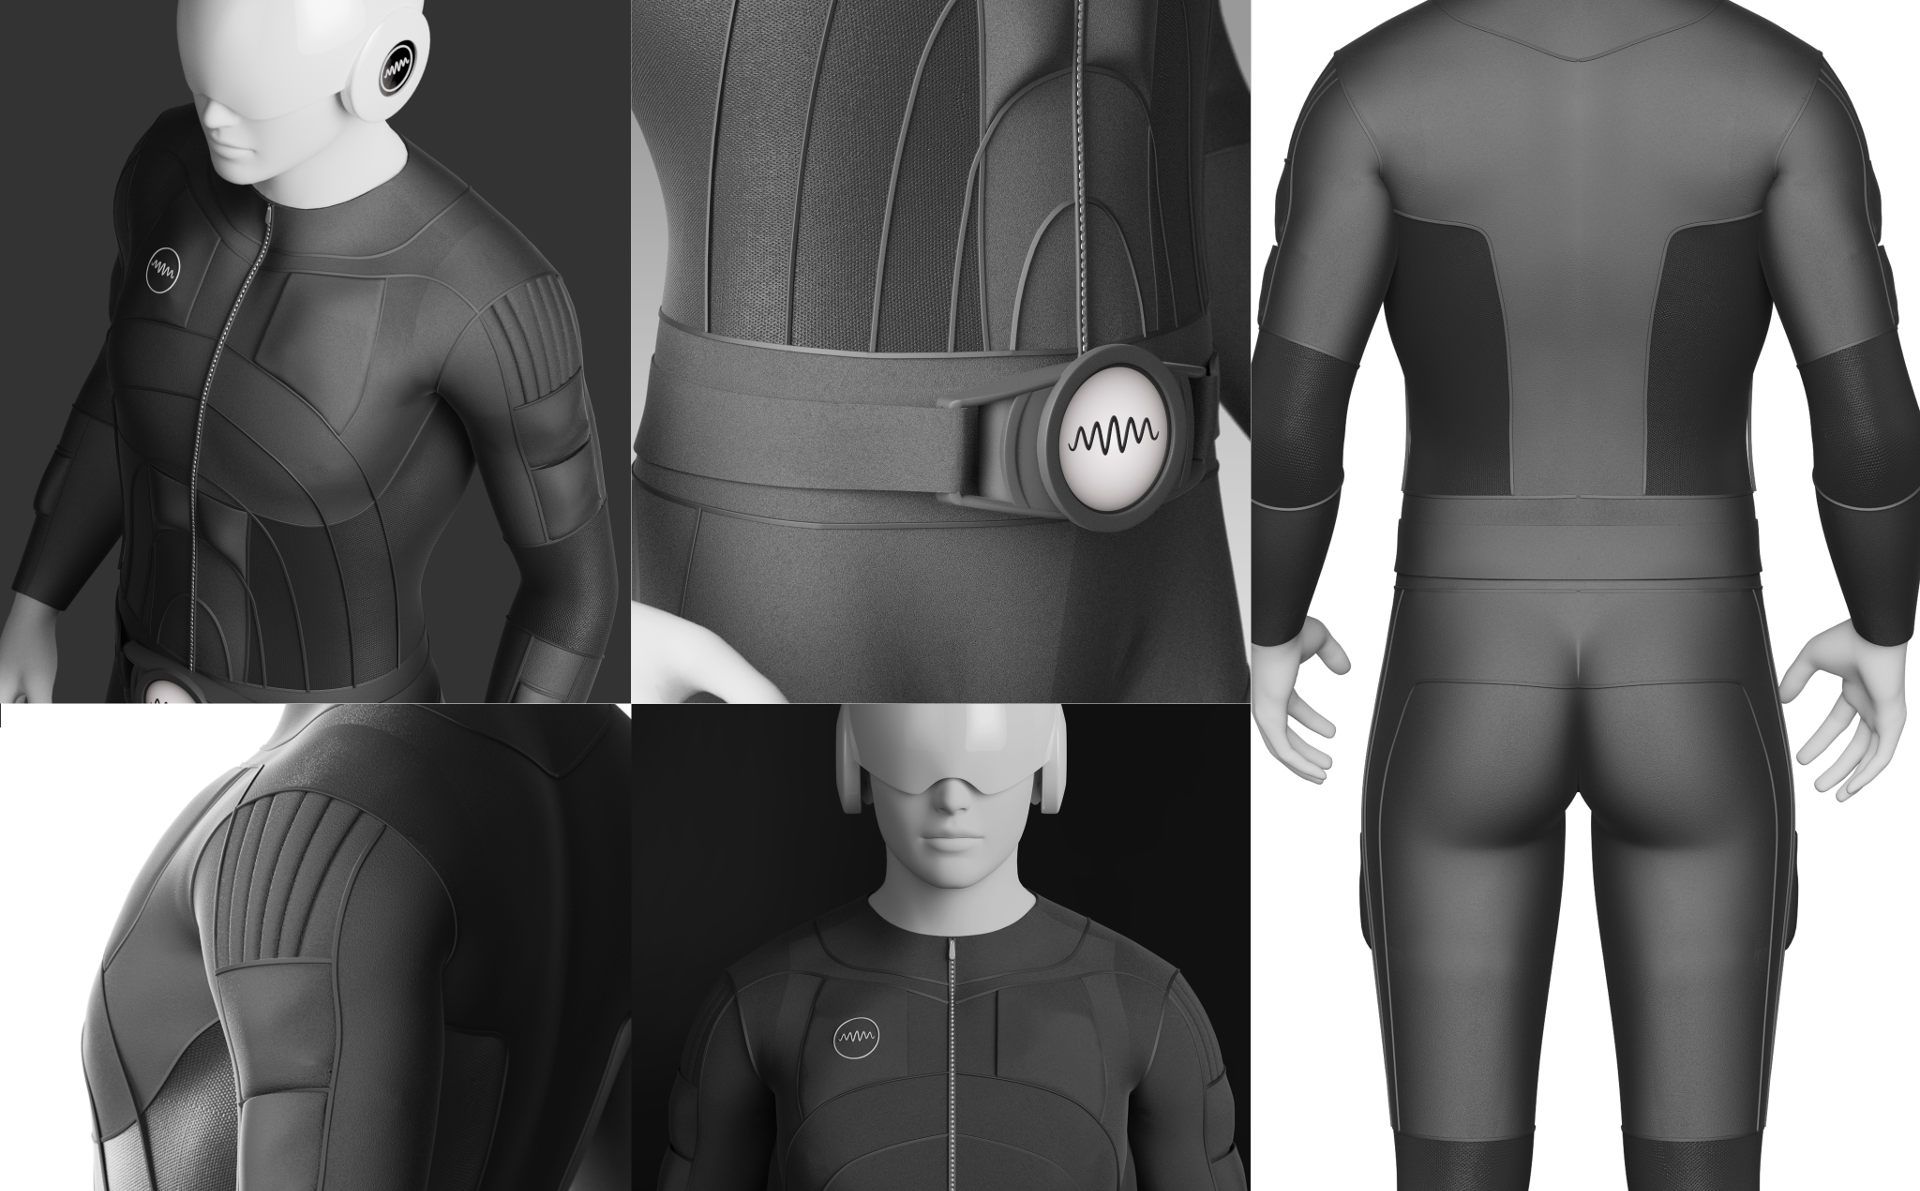 The Tesla Suit is a full-body haptic suit that allows users to feel what they play. It’s a smart textile gaming suit that lets people interact with virtual environments in ways that were not possible before. 